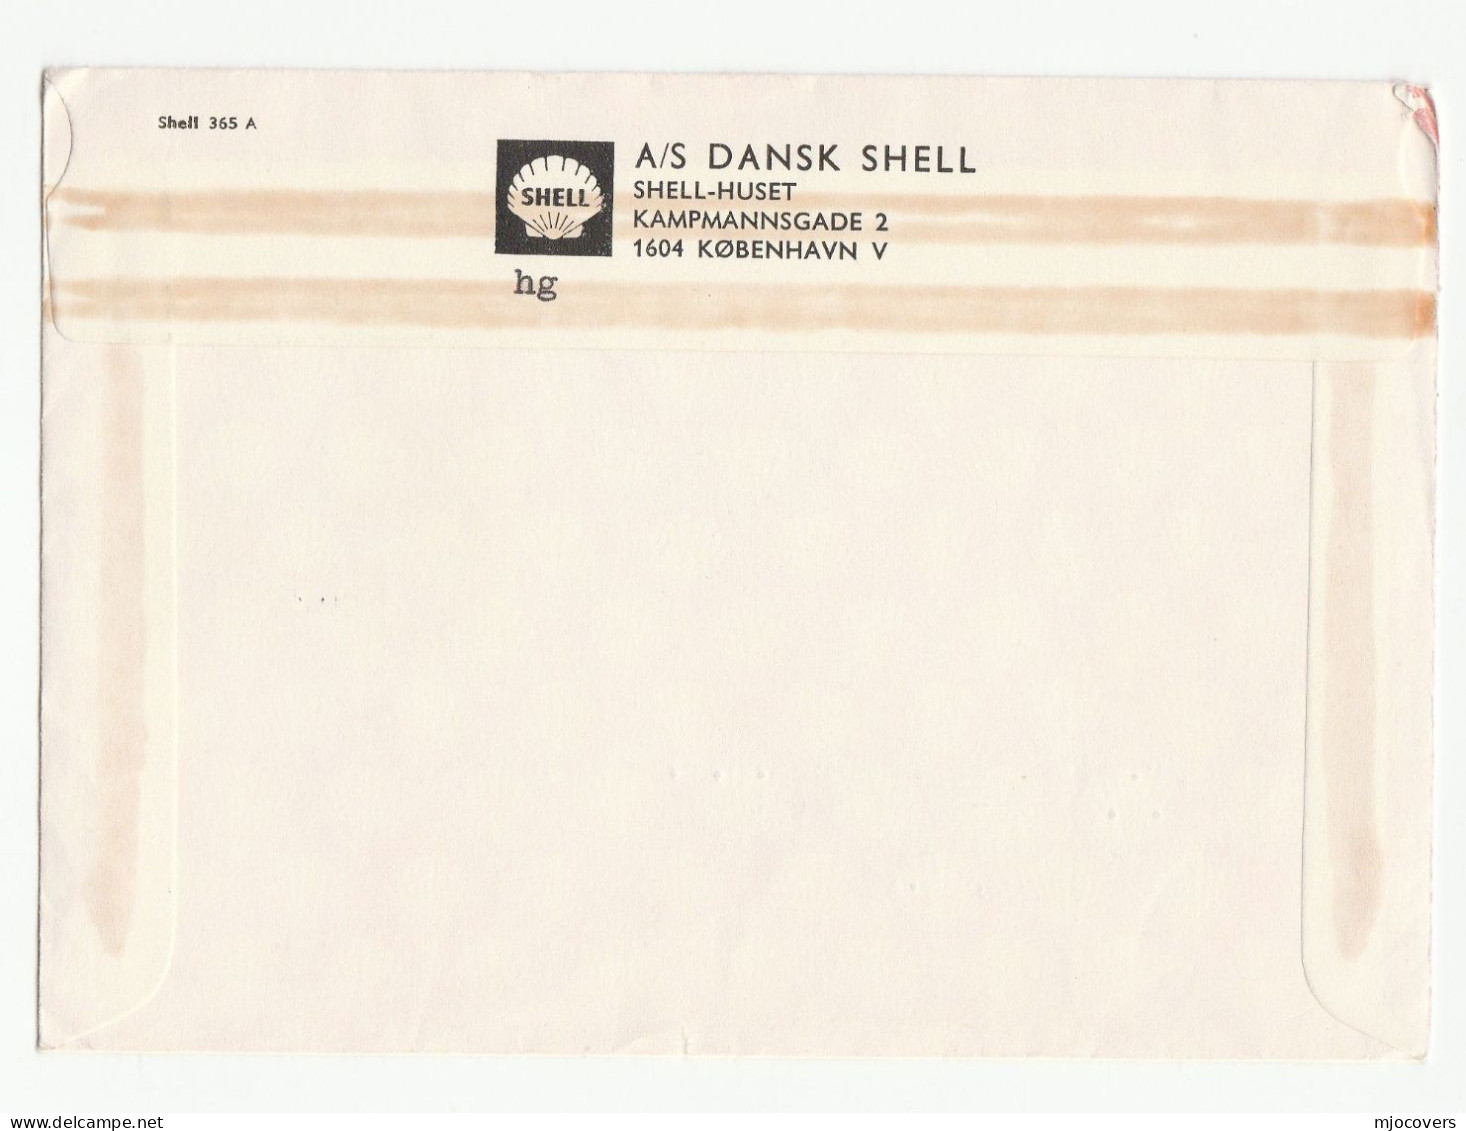 SHELL OIL To BP OIL 1968 Denmark Cover With LETTER Energy Petrochemicals Fdc Stamps - Oil